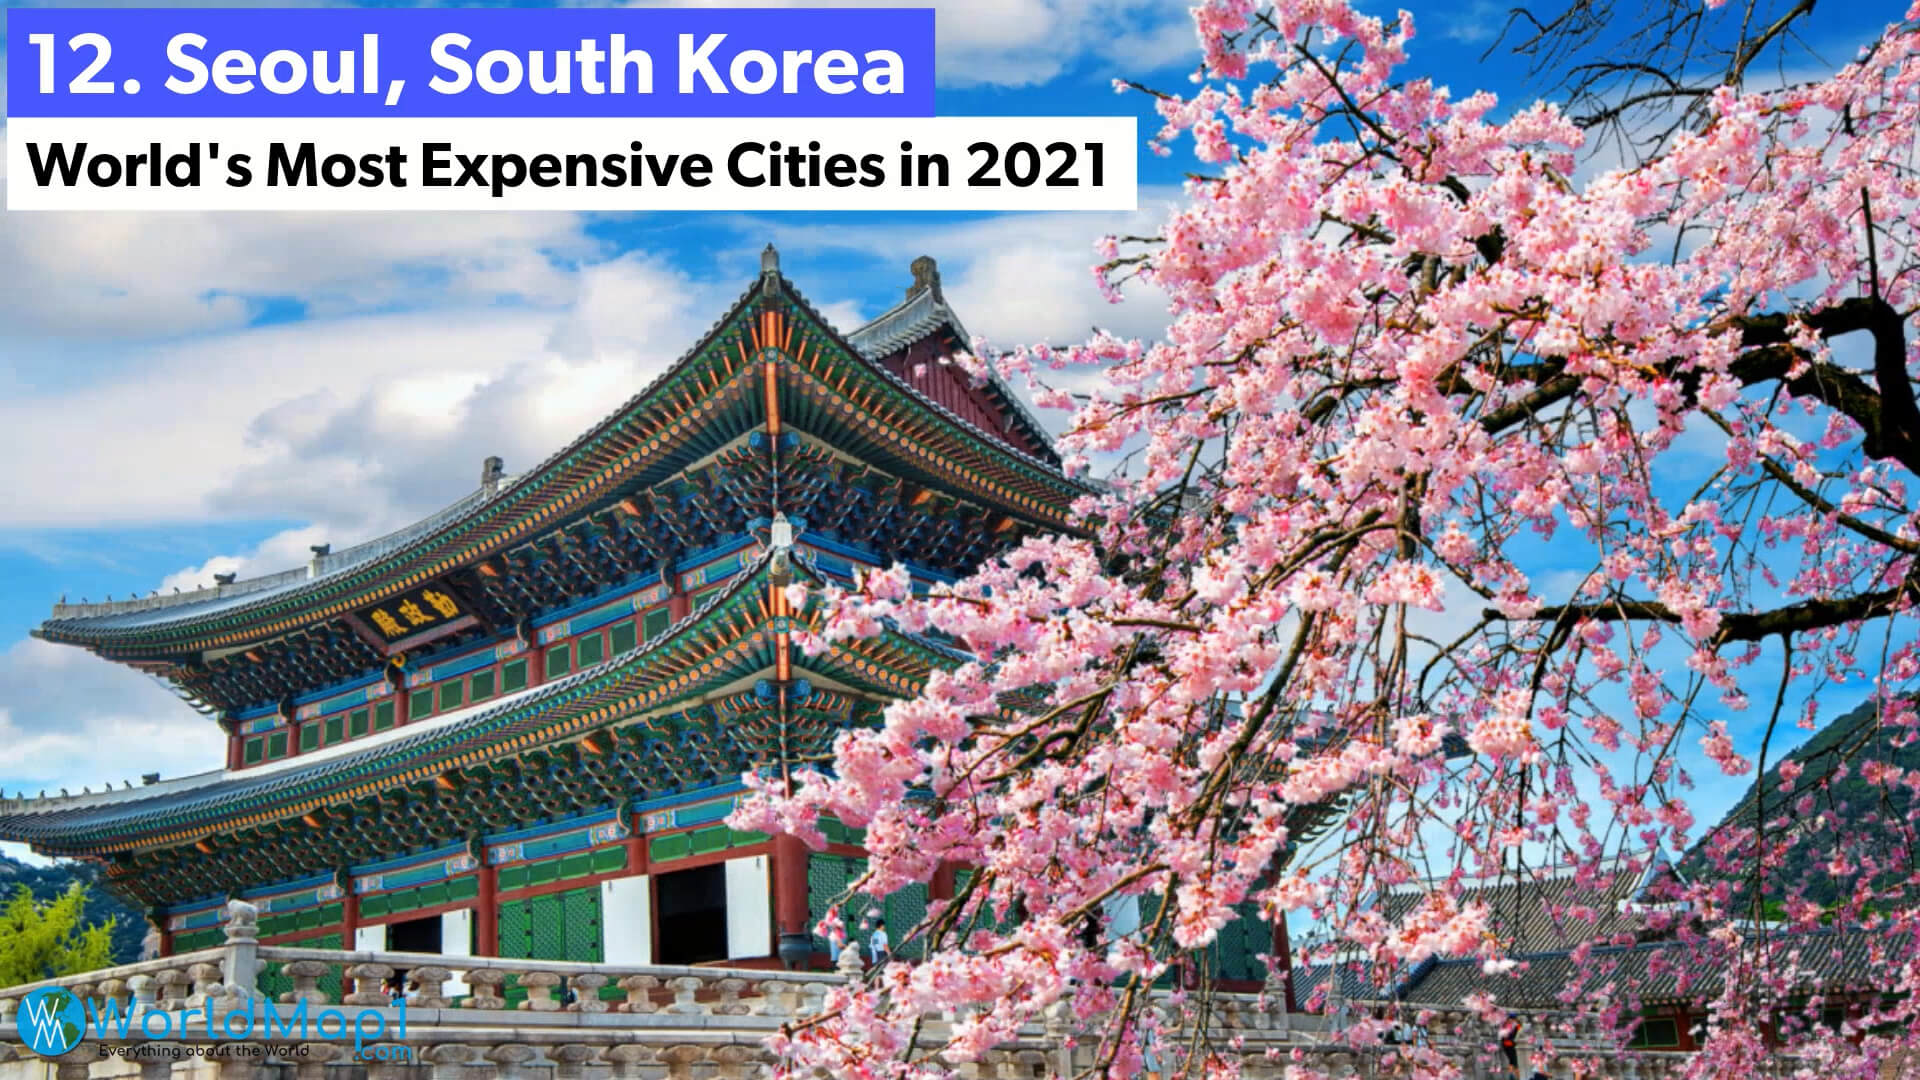 World's Most Expensive Cities - Seoul, South Korea